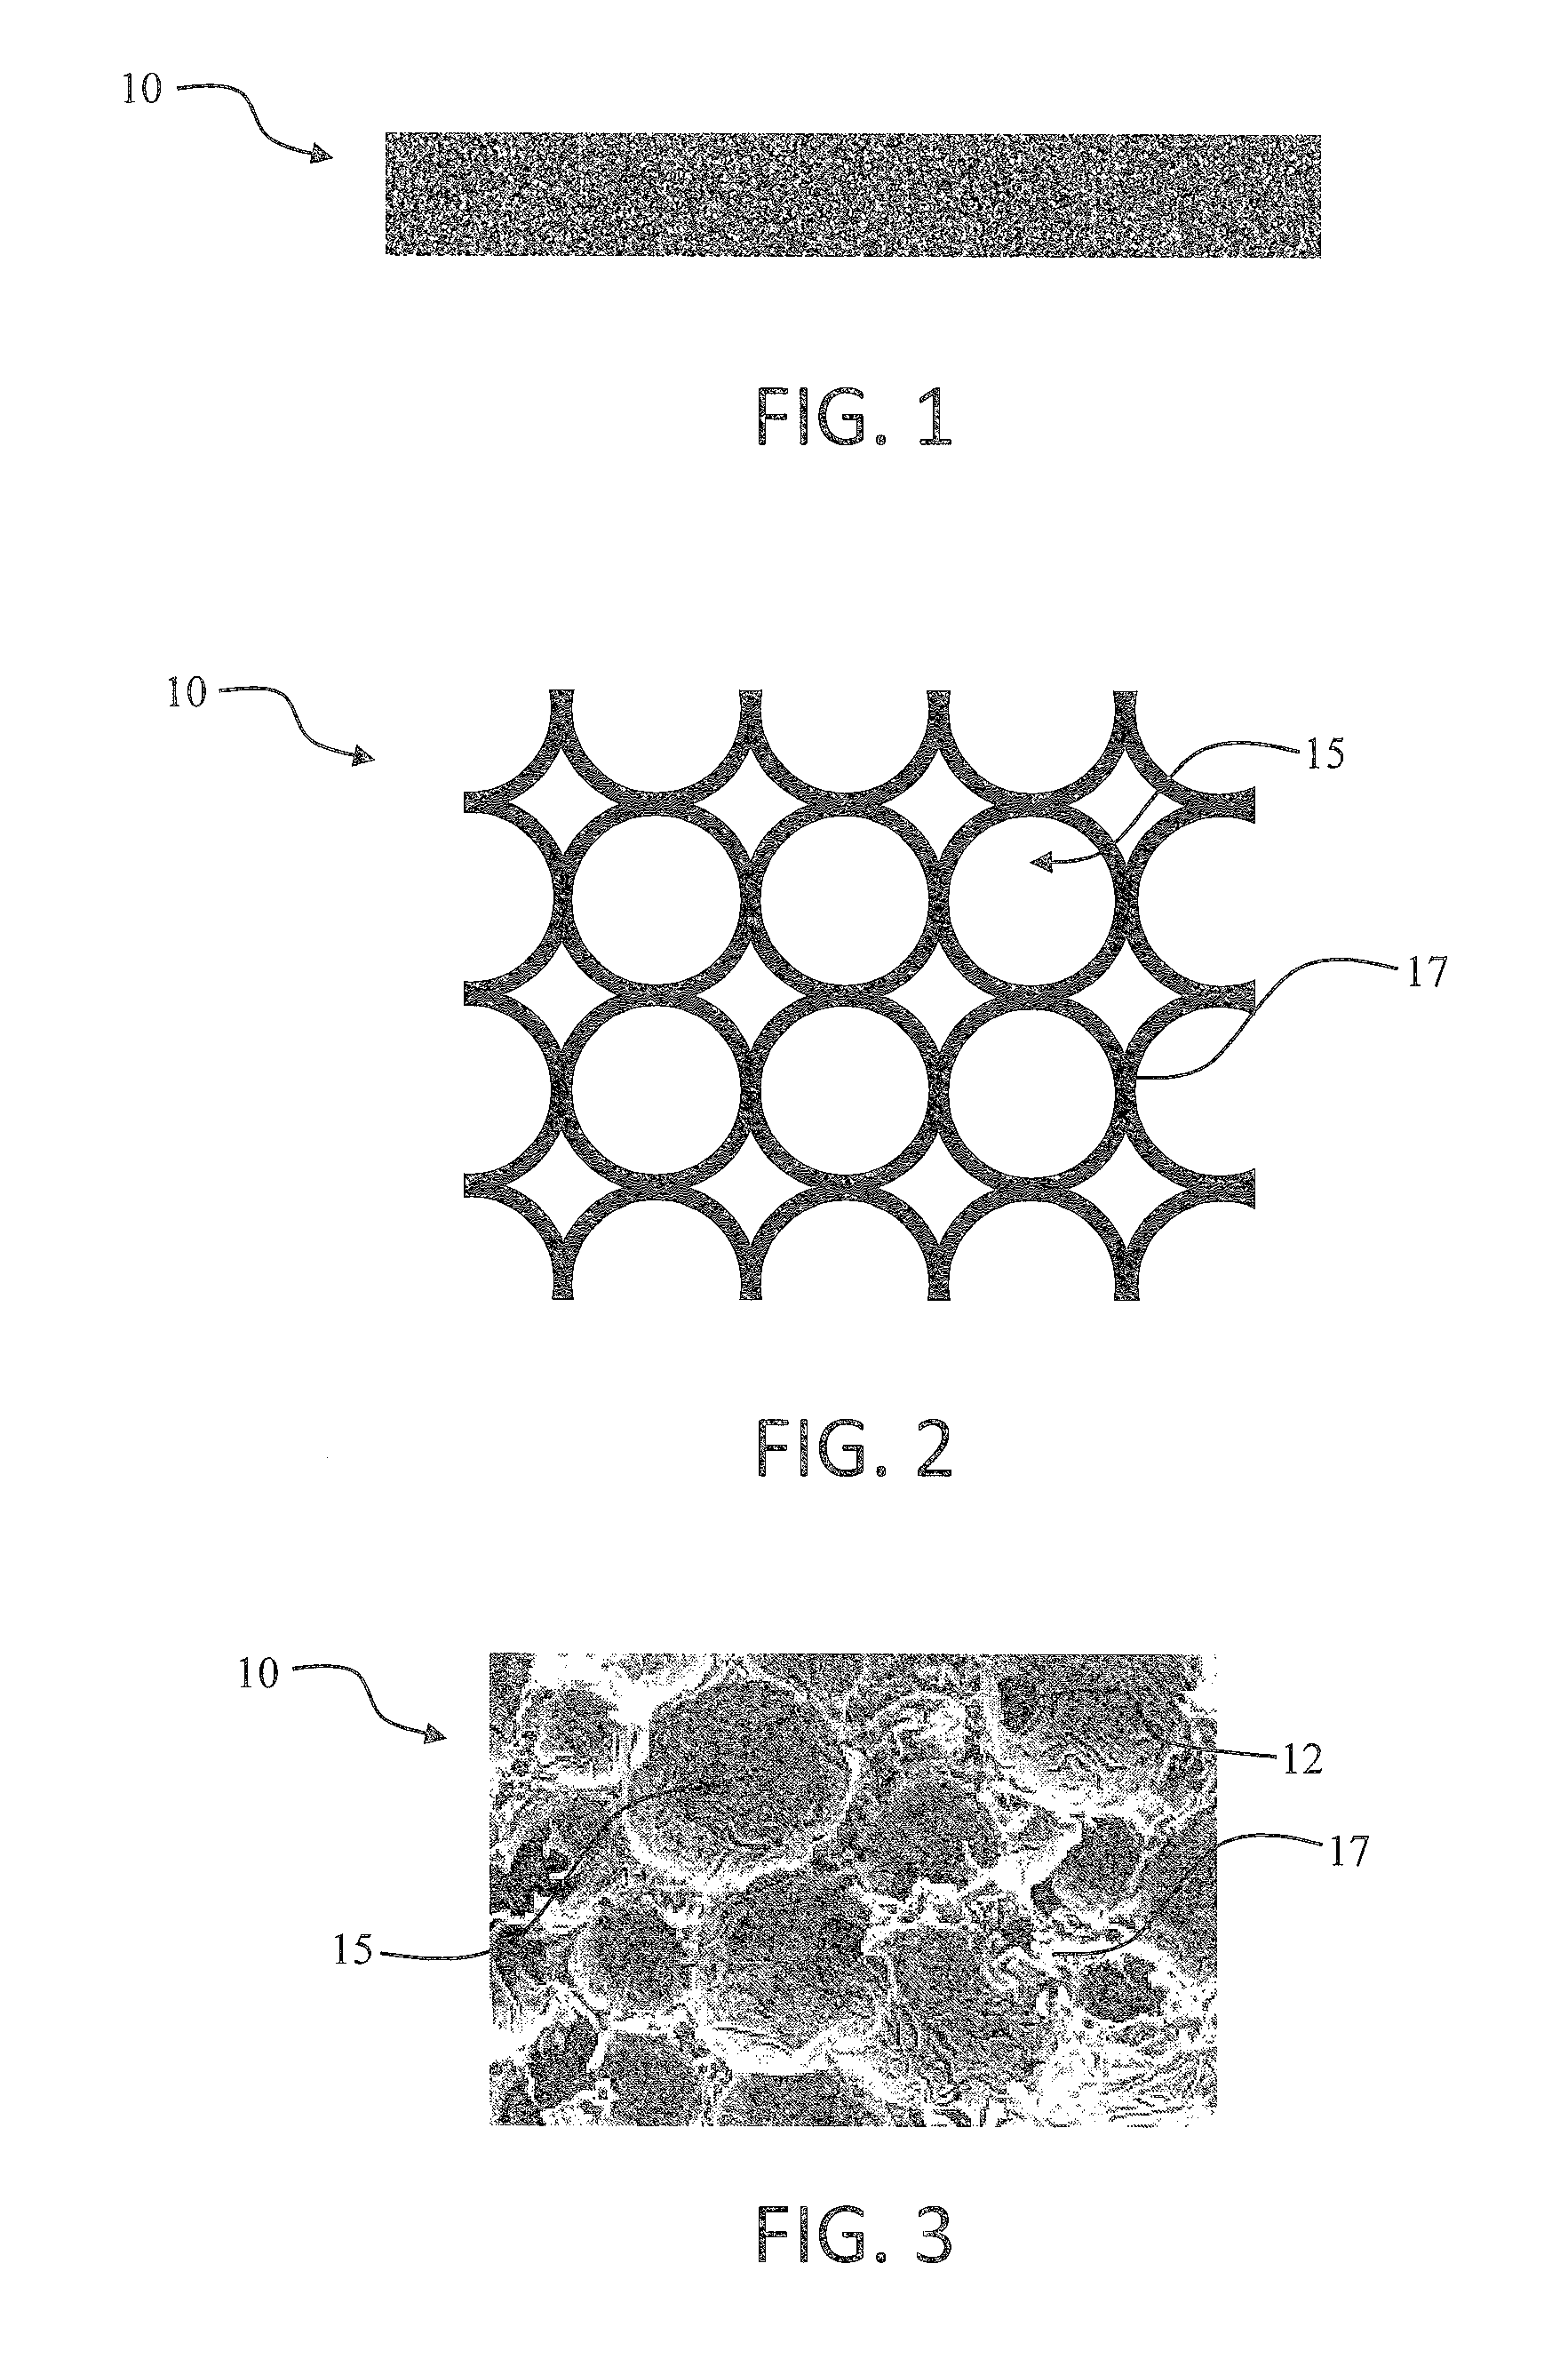 Carbon conductive substrate for electronic smoking article